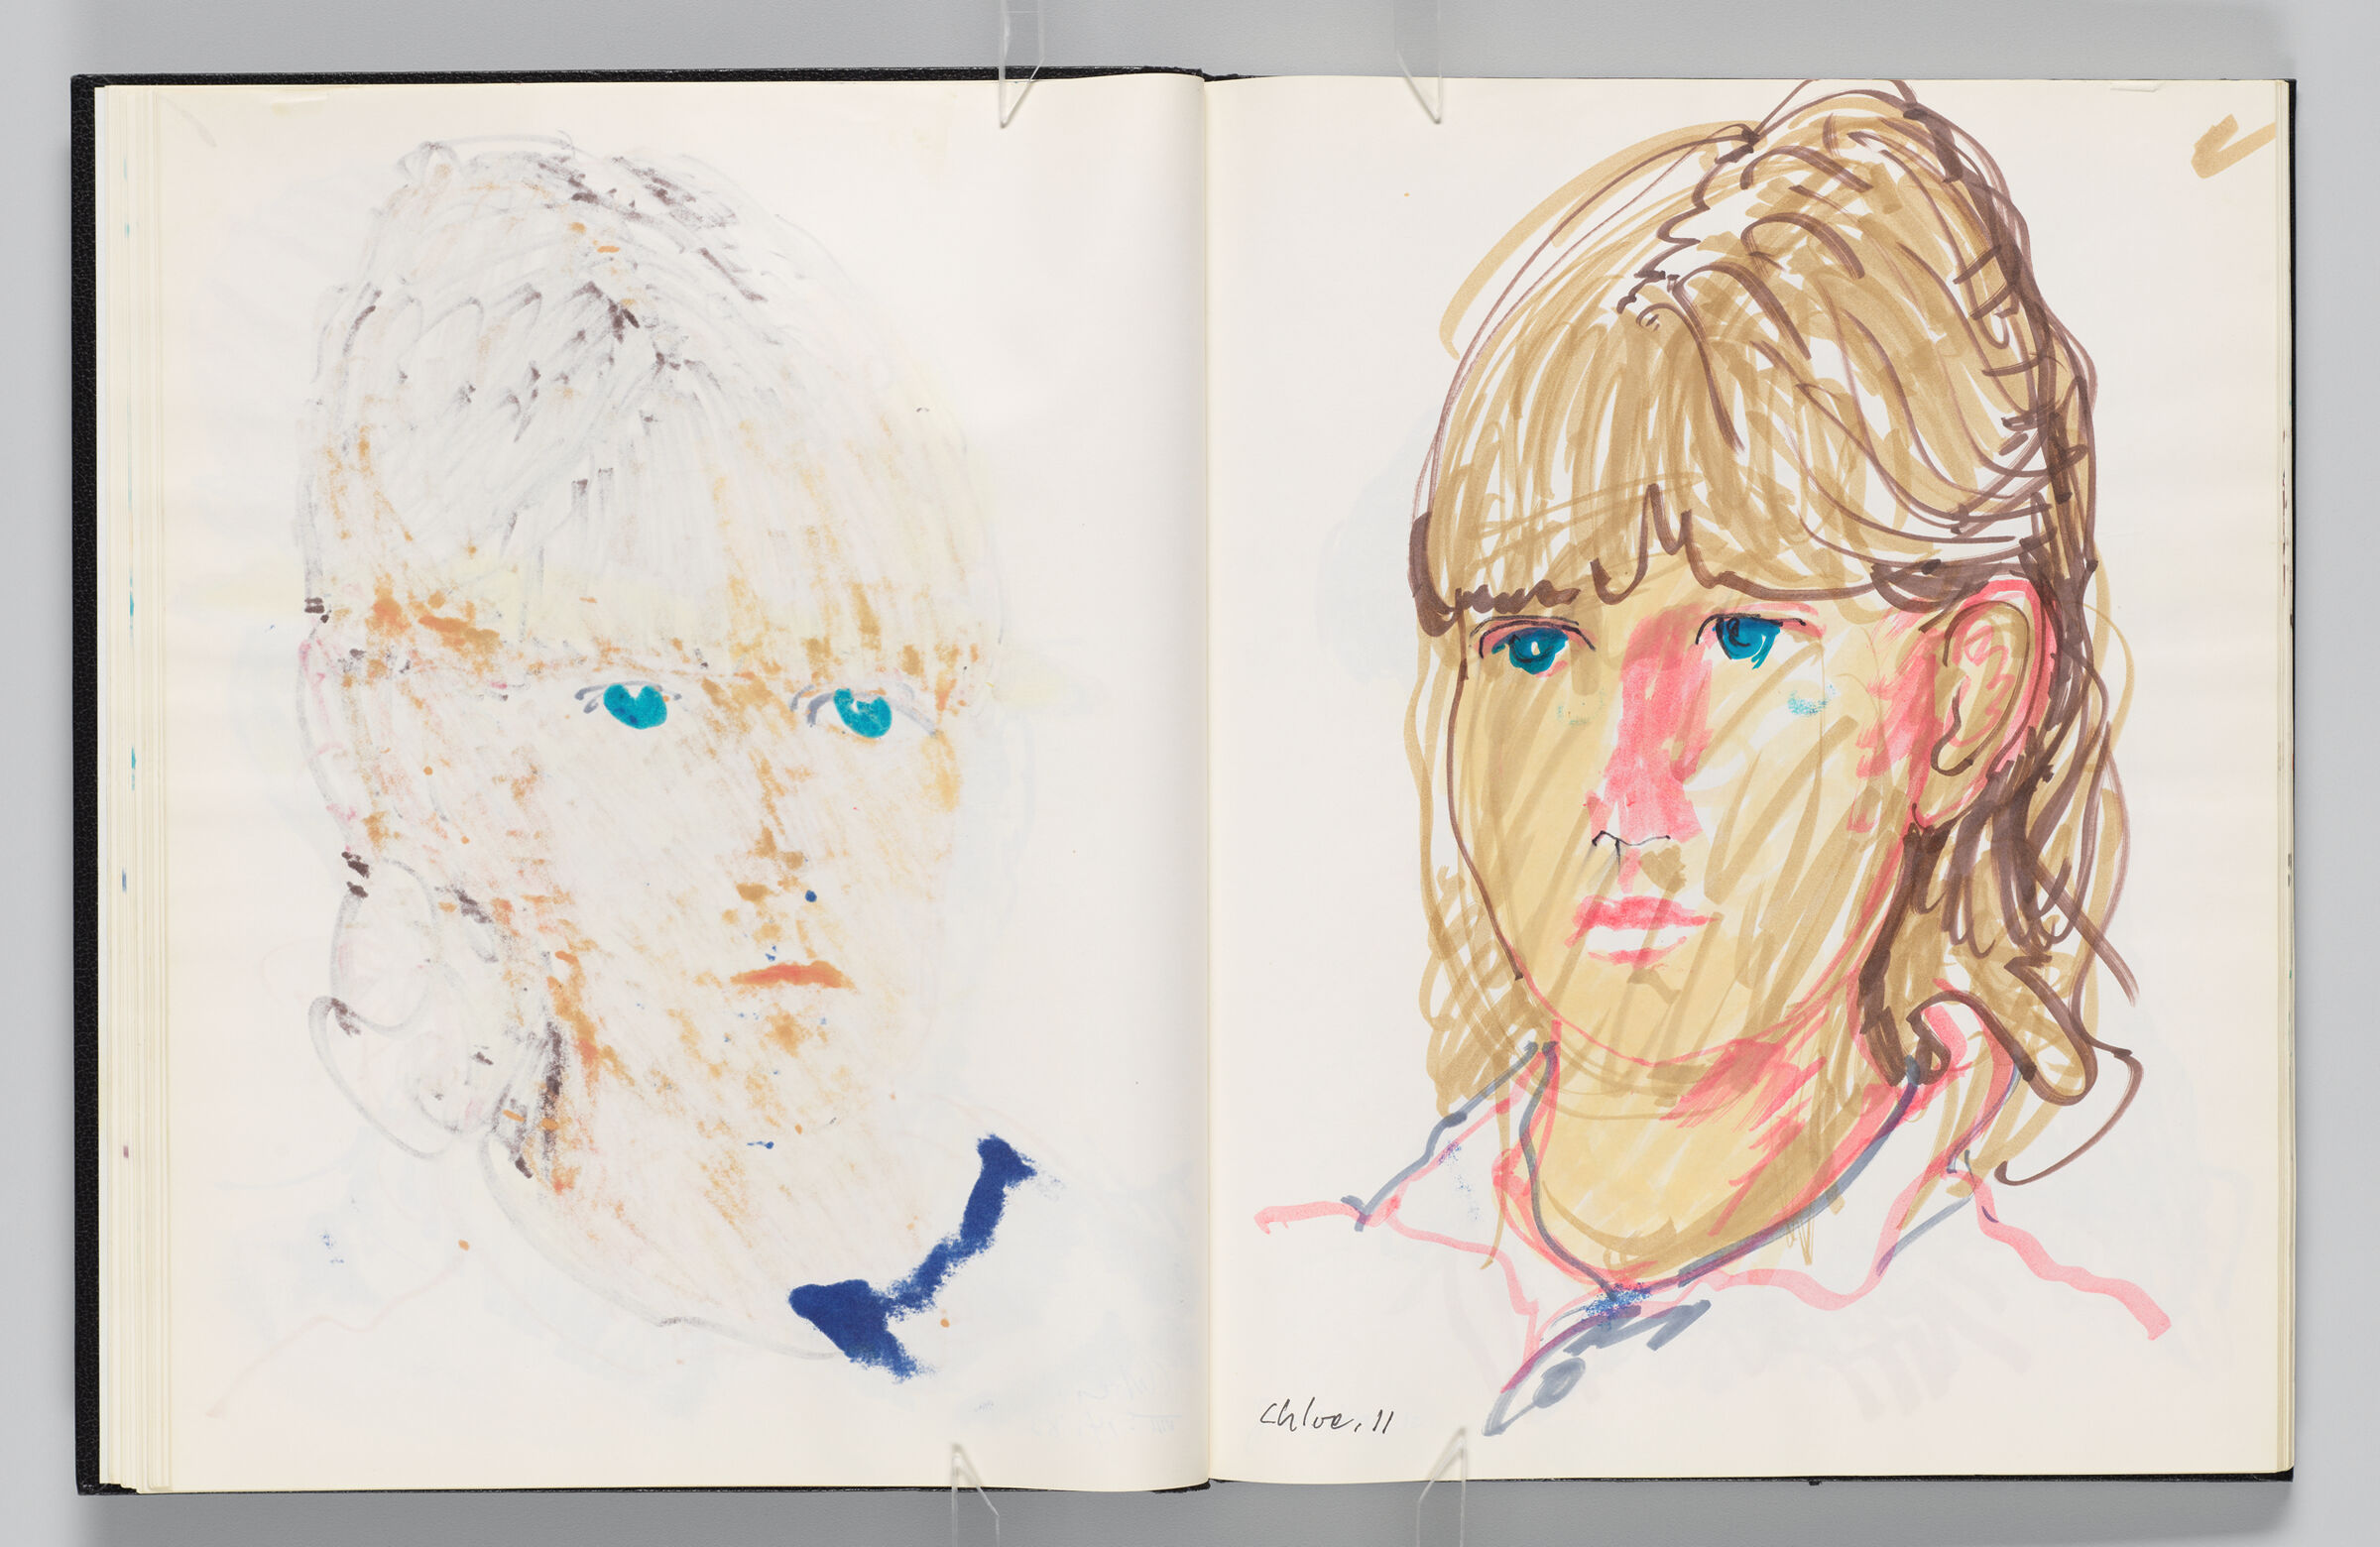 Untitled (Bleed-Through Of Previous Page, Left Page); Untitled (Portrait Of Female Figure (Chloe), Right Page)